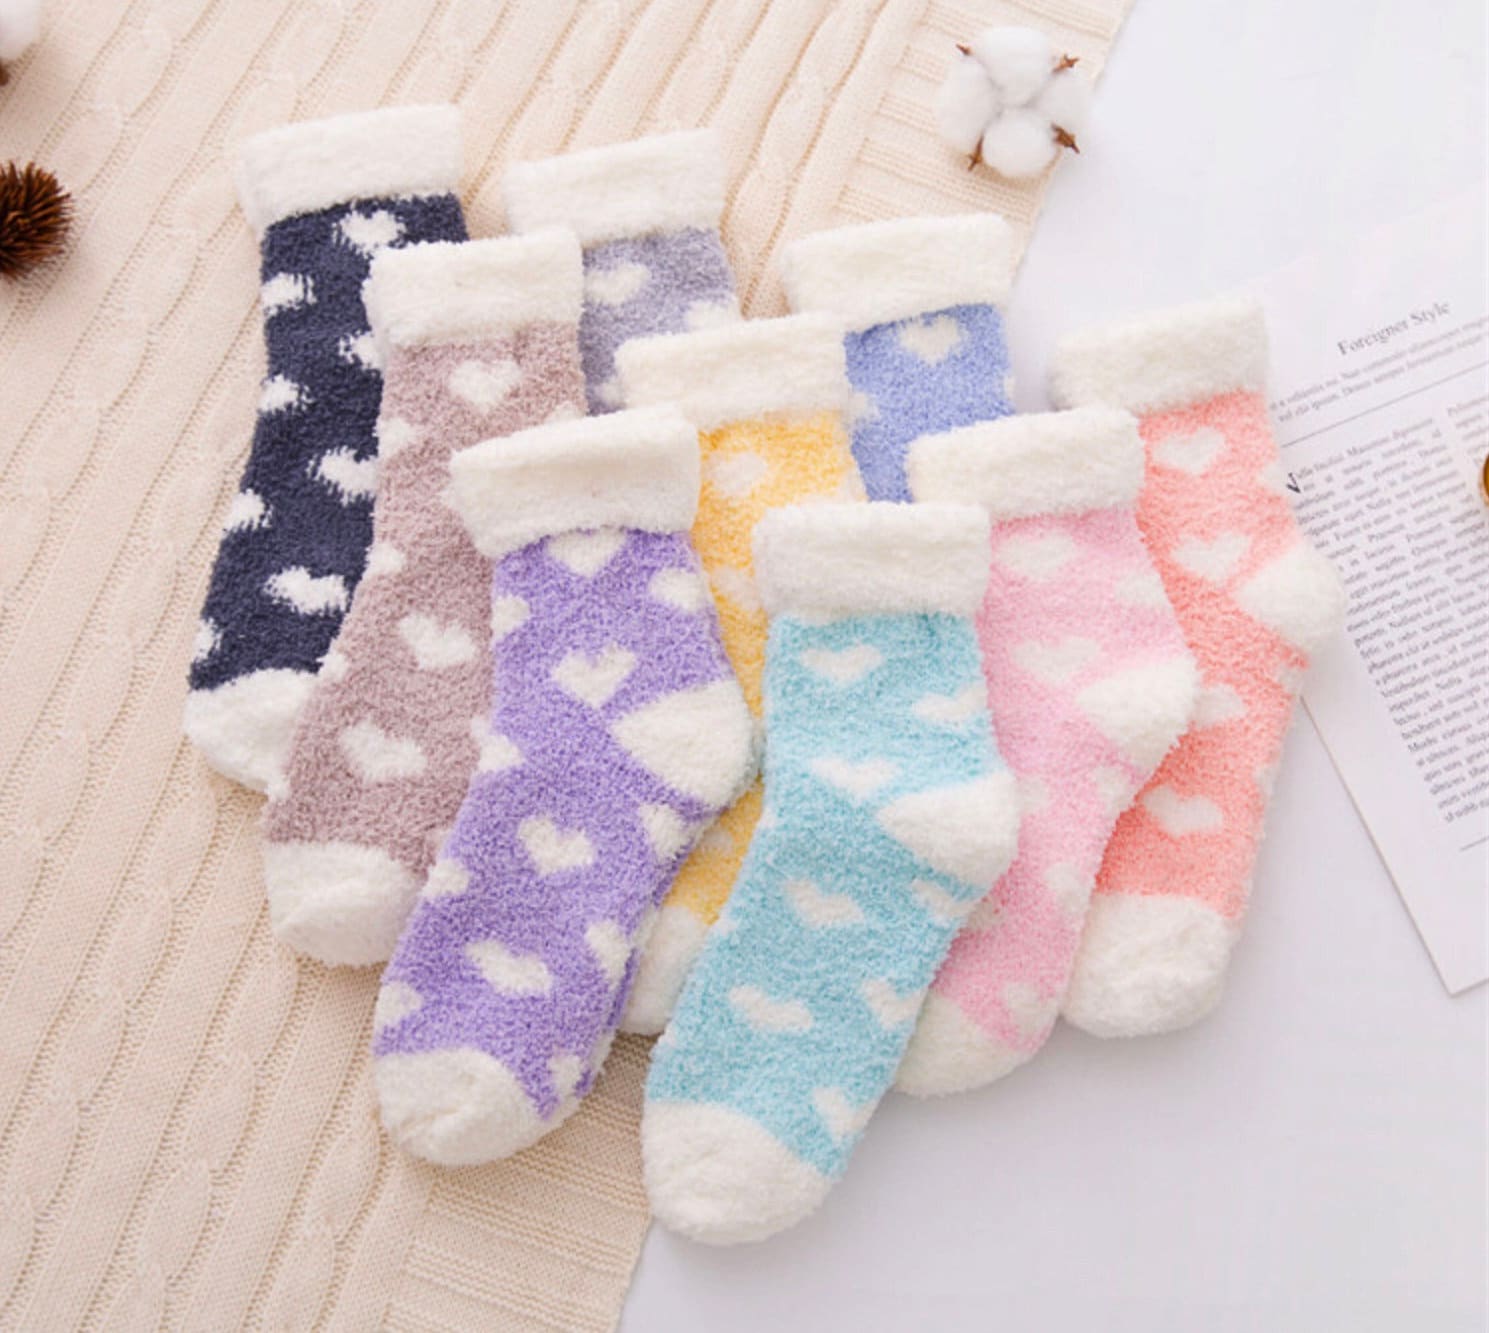 Luxe Cozy Fuzzy Socks With Hearts Add to Your Build A Box & Create